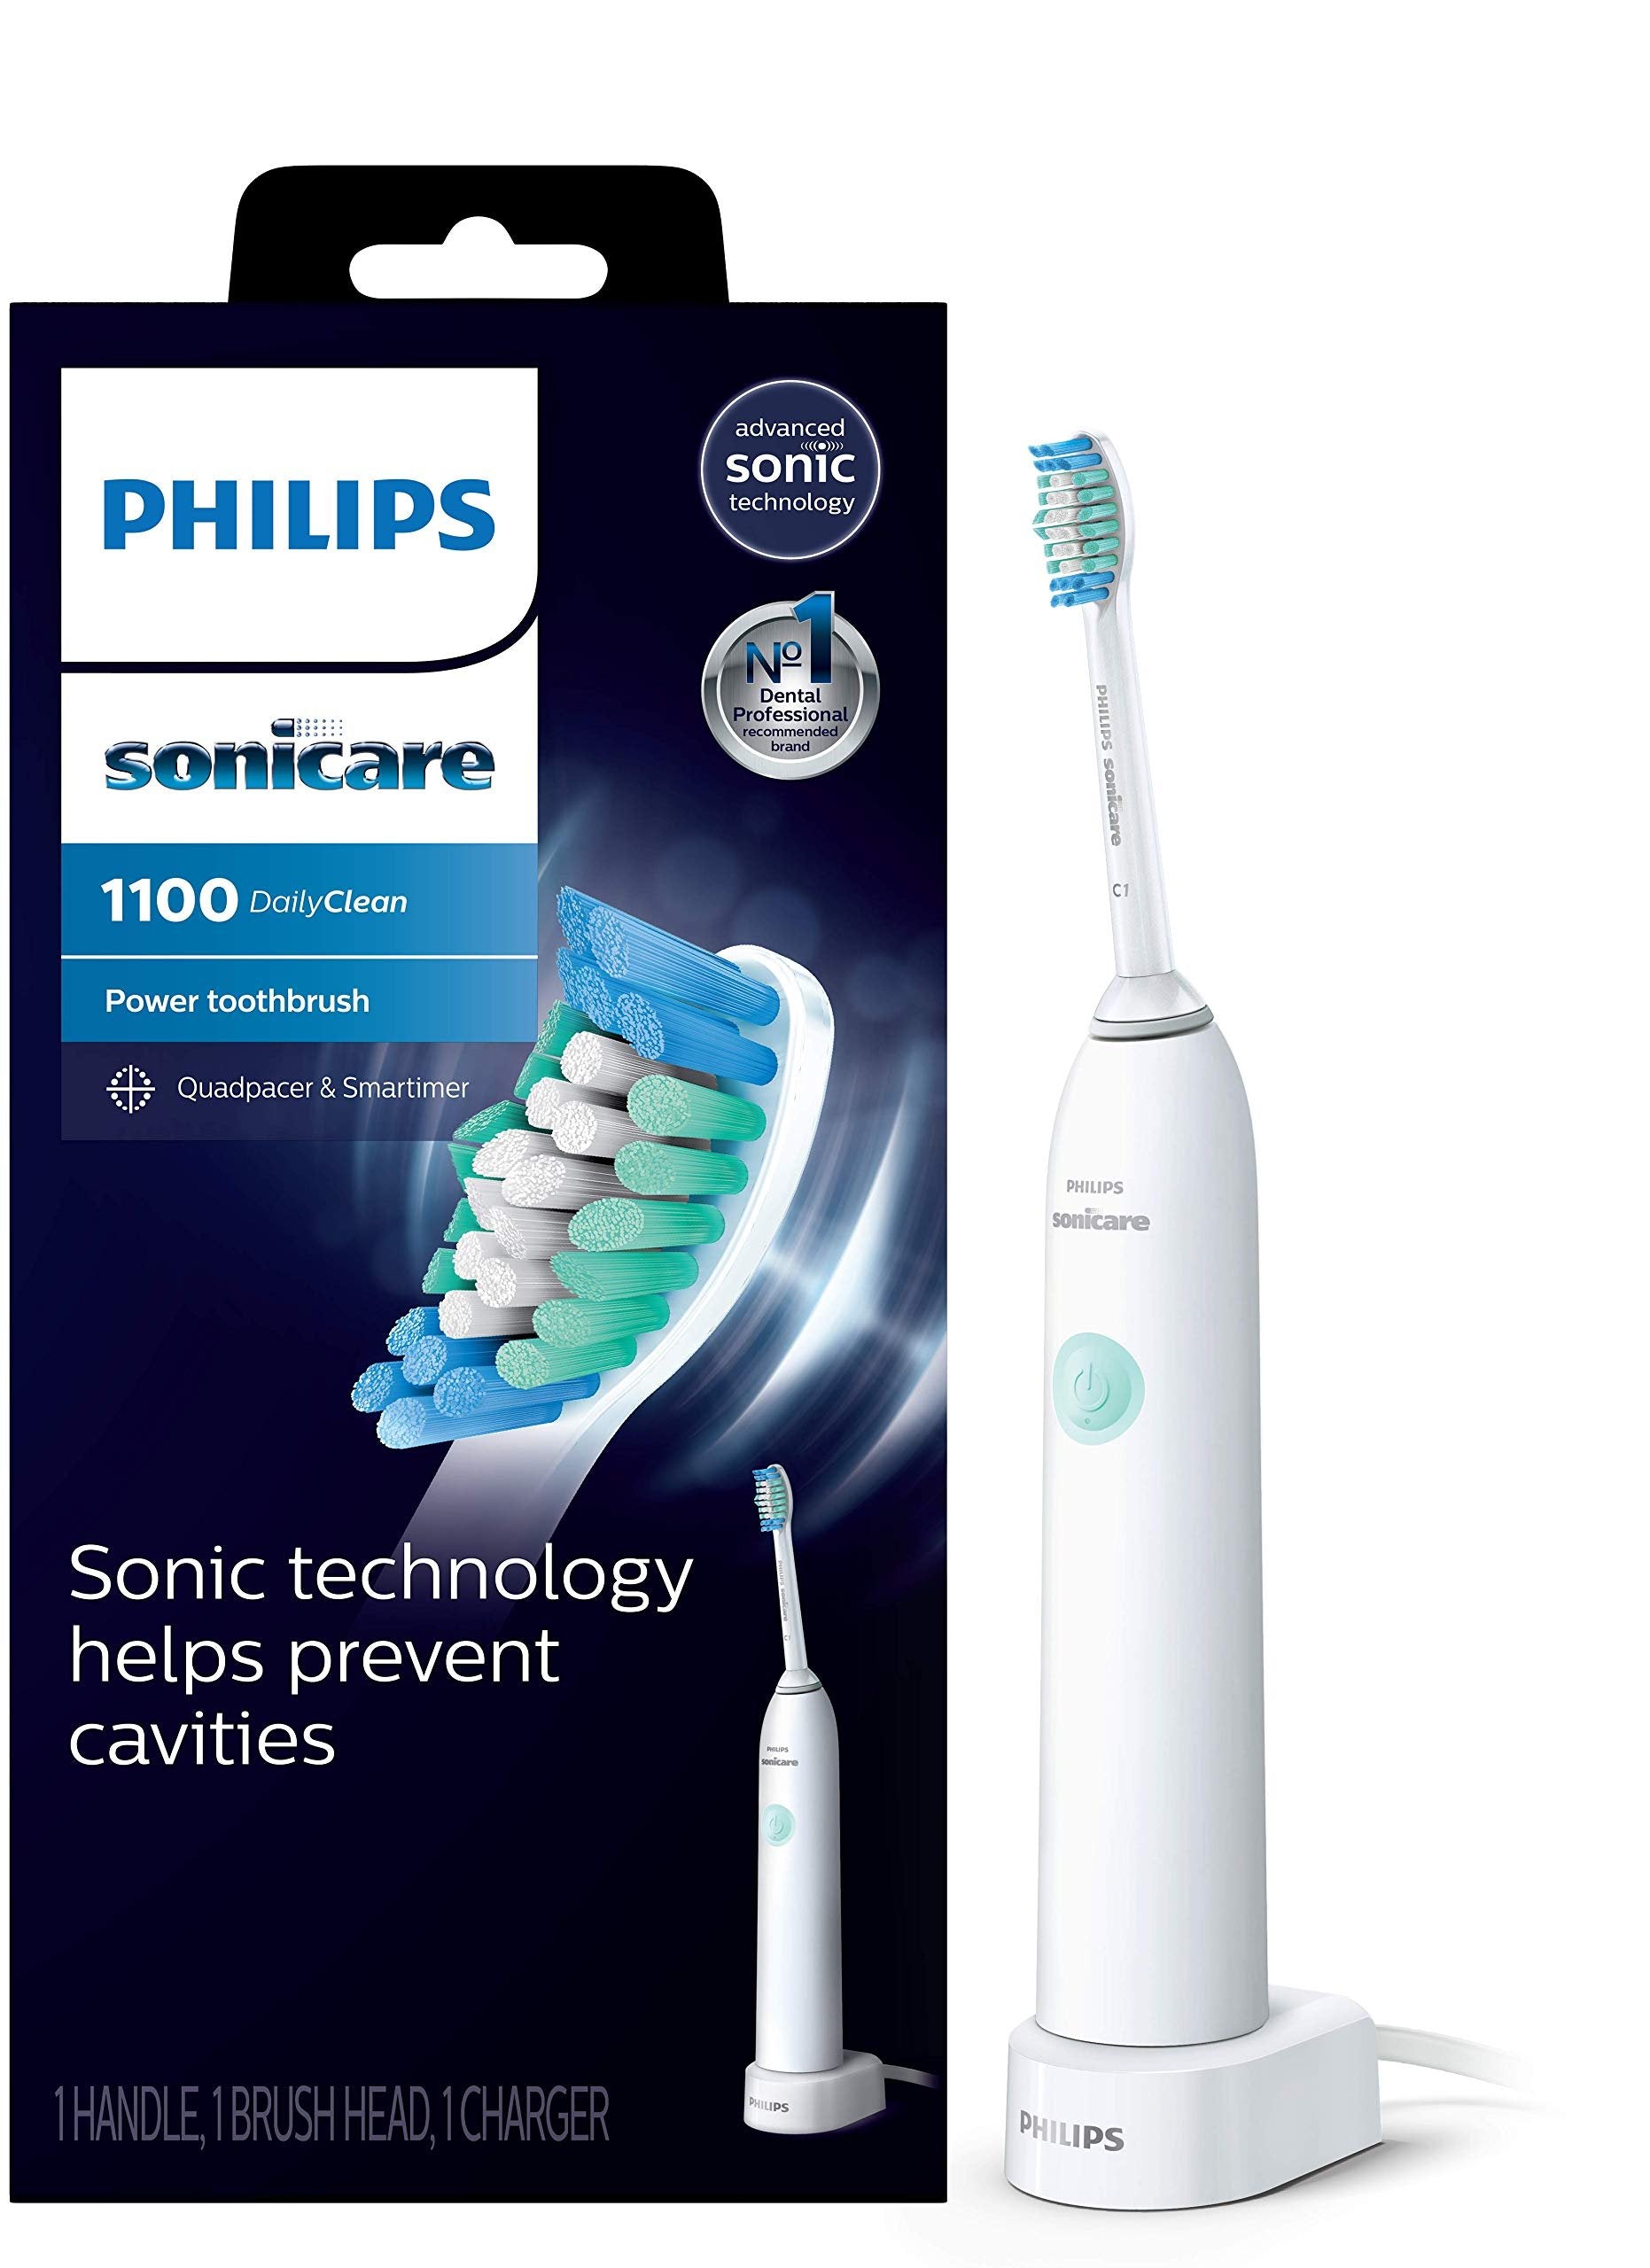 Philips Sonicare DailyClean Electric Toothbrush - White - 3 Piece Set - Rechargeable - Free Shipping & Returns